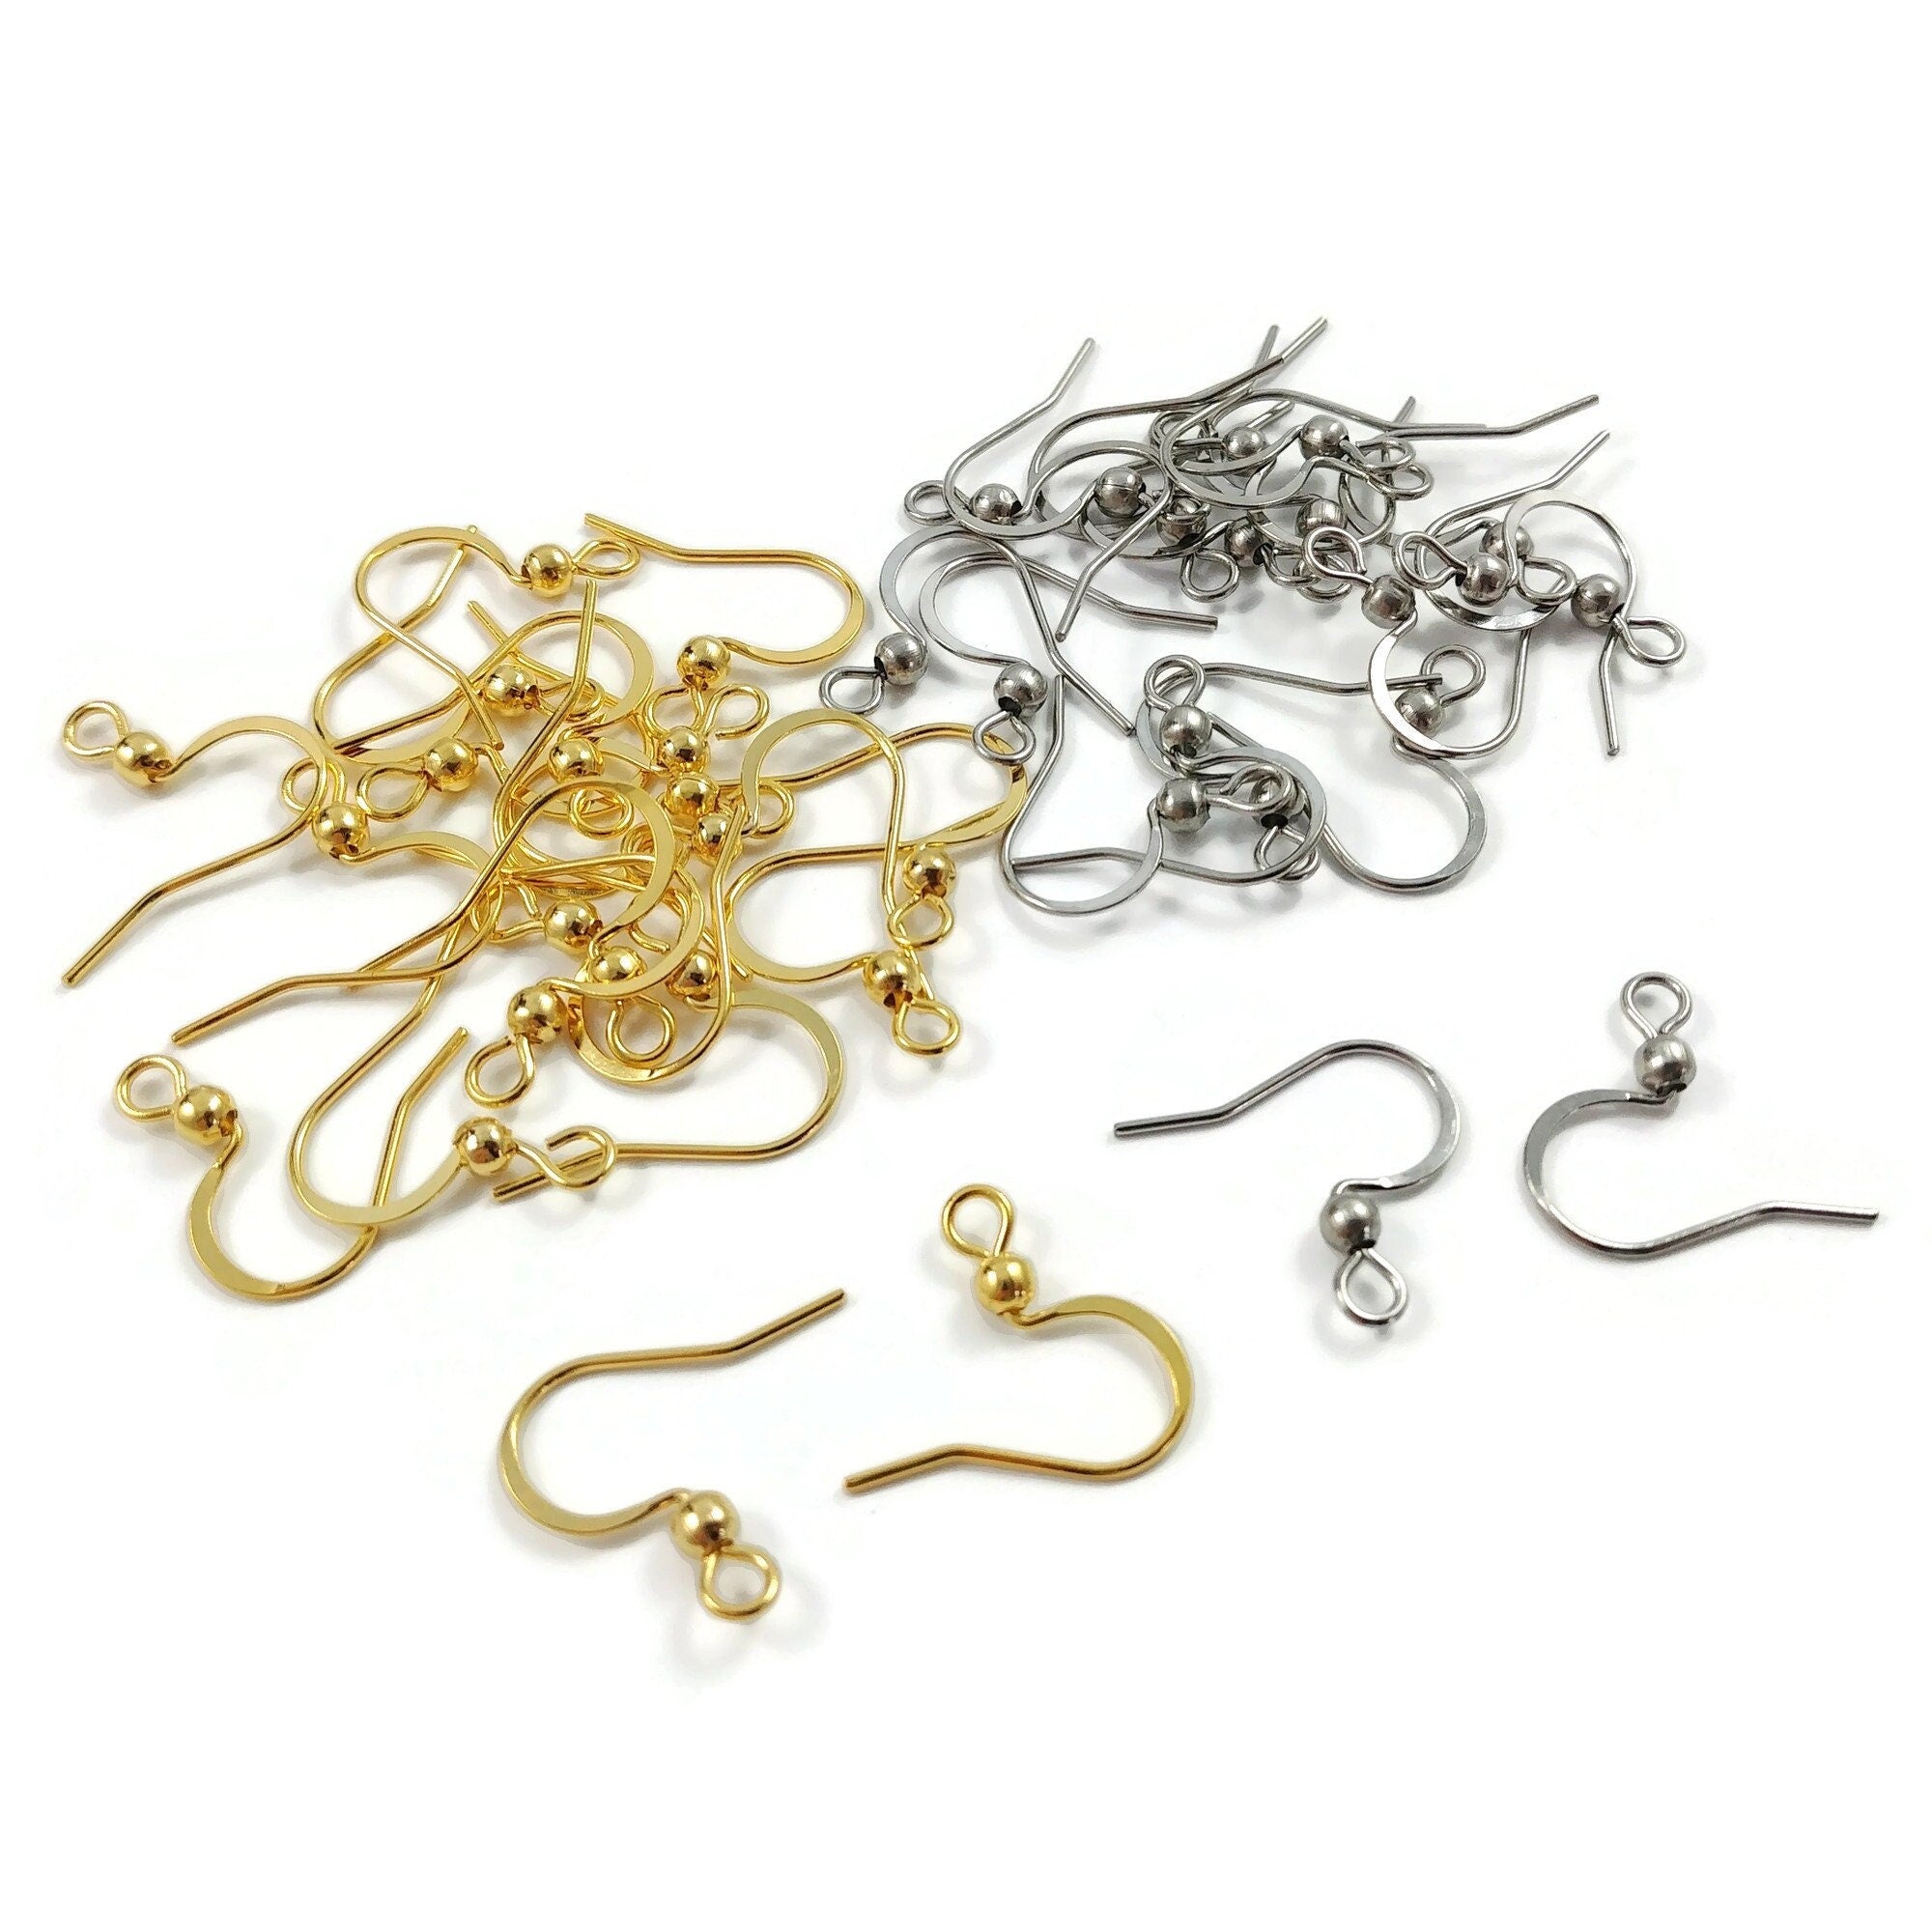 Stainless steel flat french earring hooks, 20 pcs (10 pairs) hypoallergenic ear wire, Silver, Gold